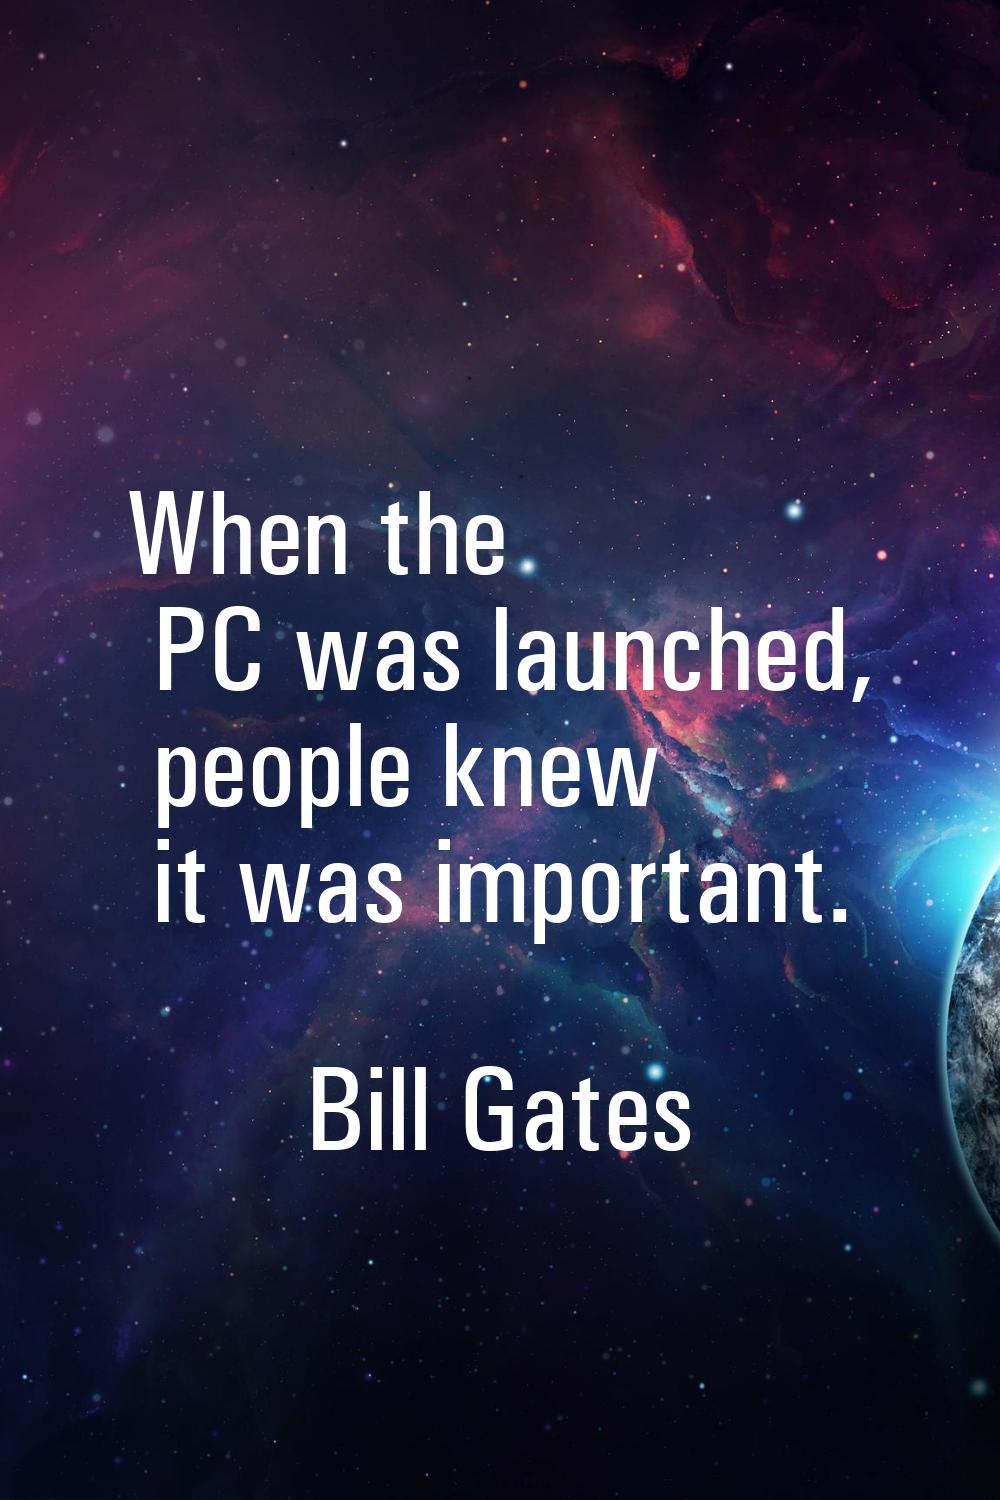 When the PC was launched, people knew it was important.